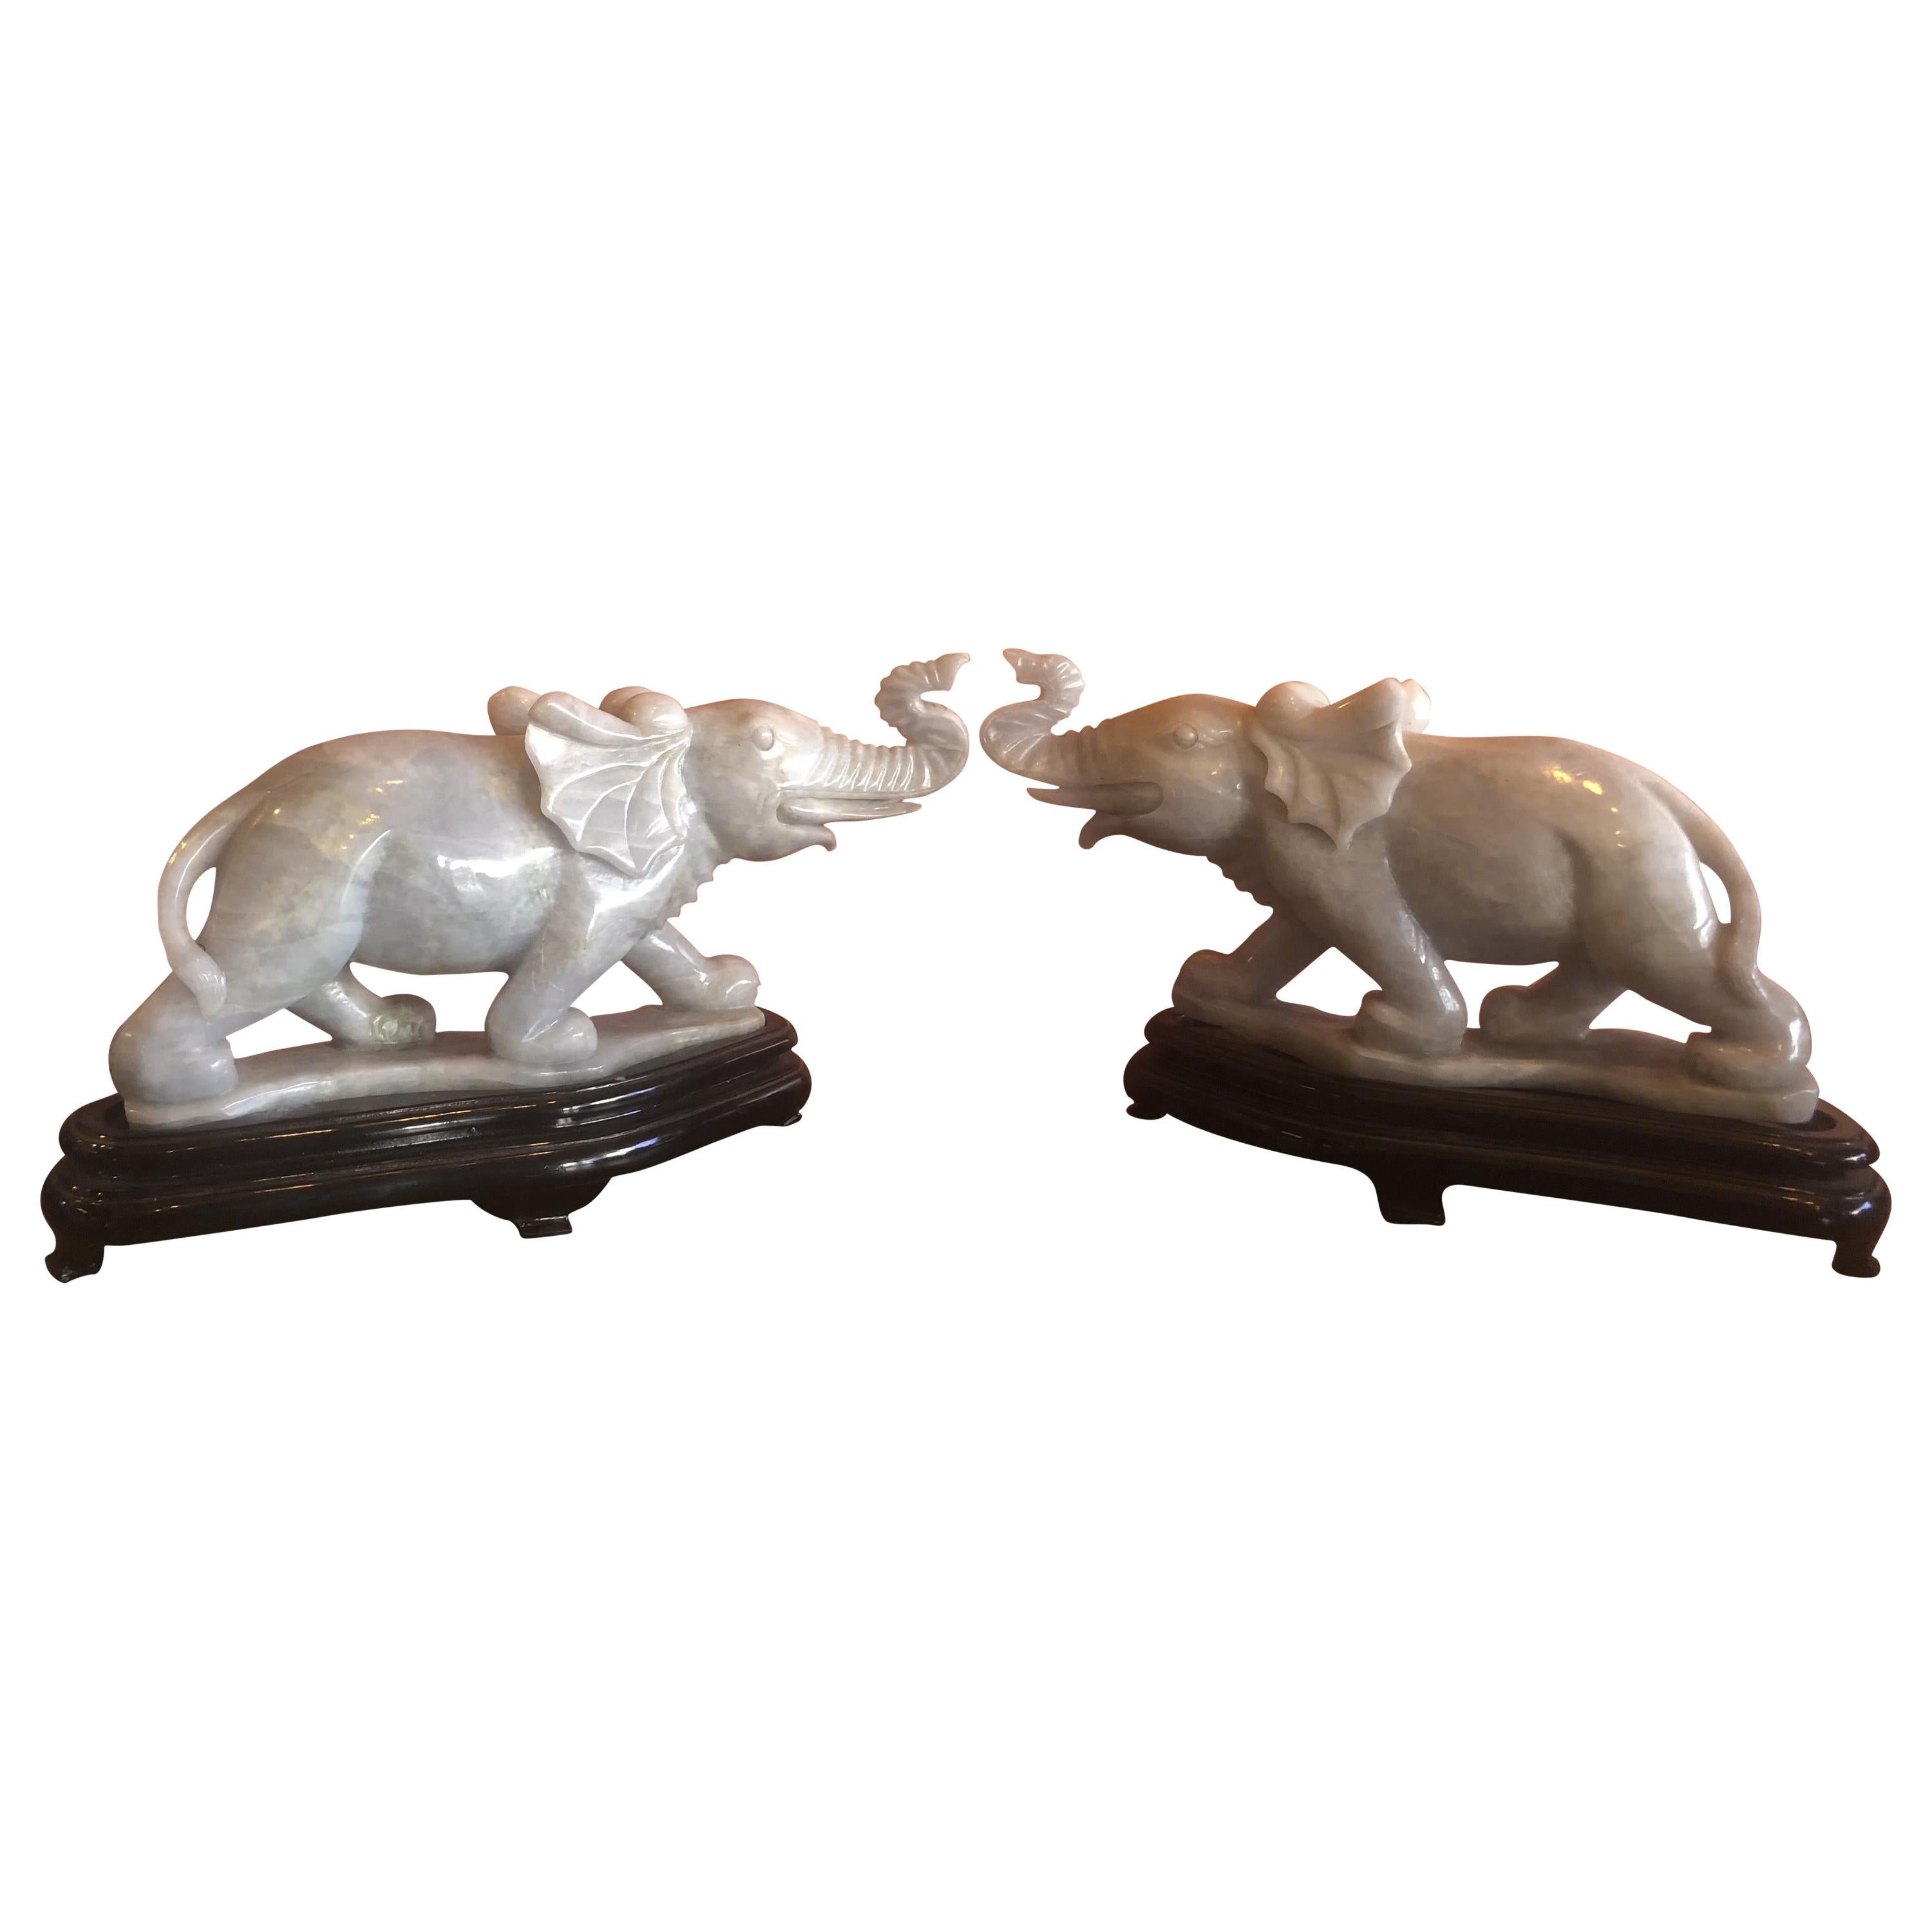 Pair of Hand Carved Elephant Sculptures on Bases in White Jade